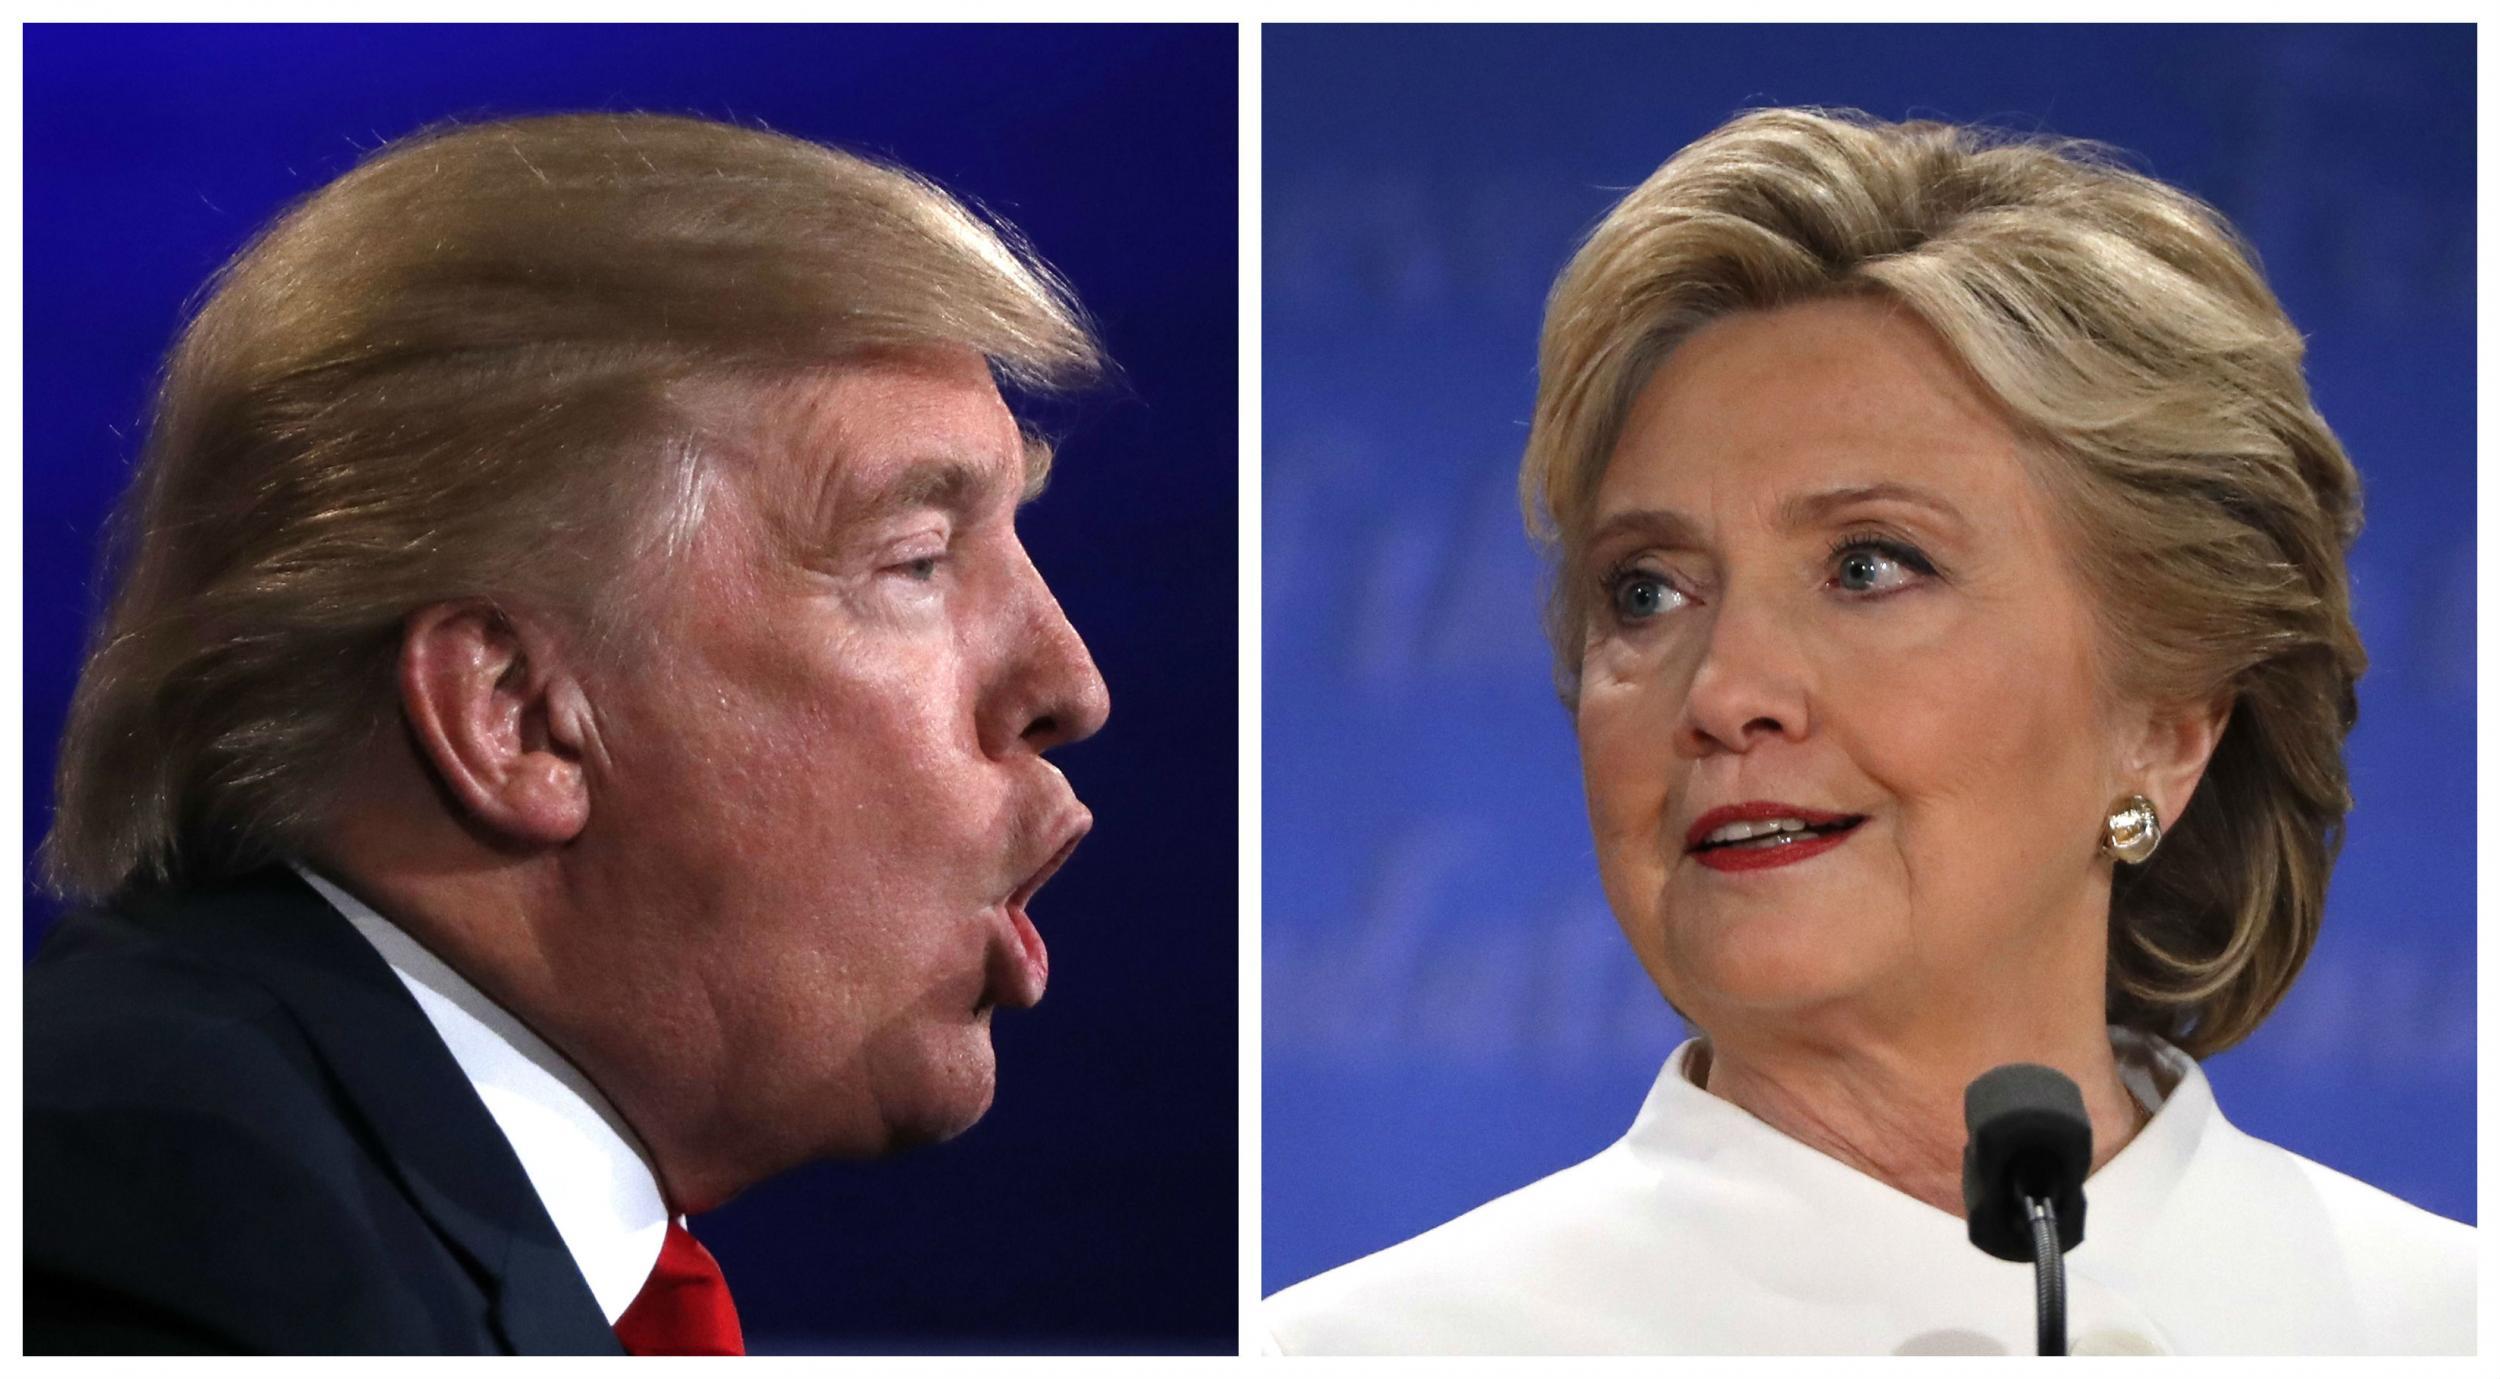 A snap CNN/ORC poll said 39 per cent of viewers thought Mr Trump won the debate and 52 per cent Ms Clinton